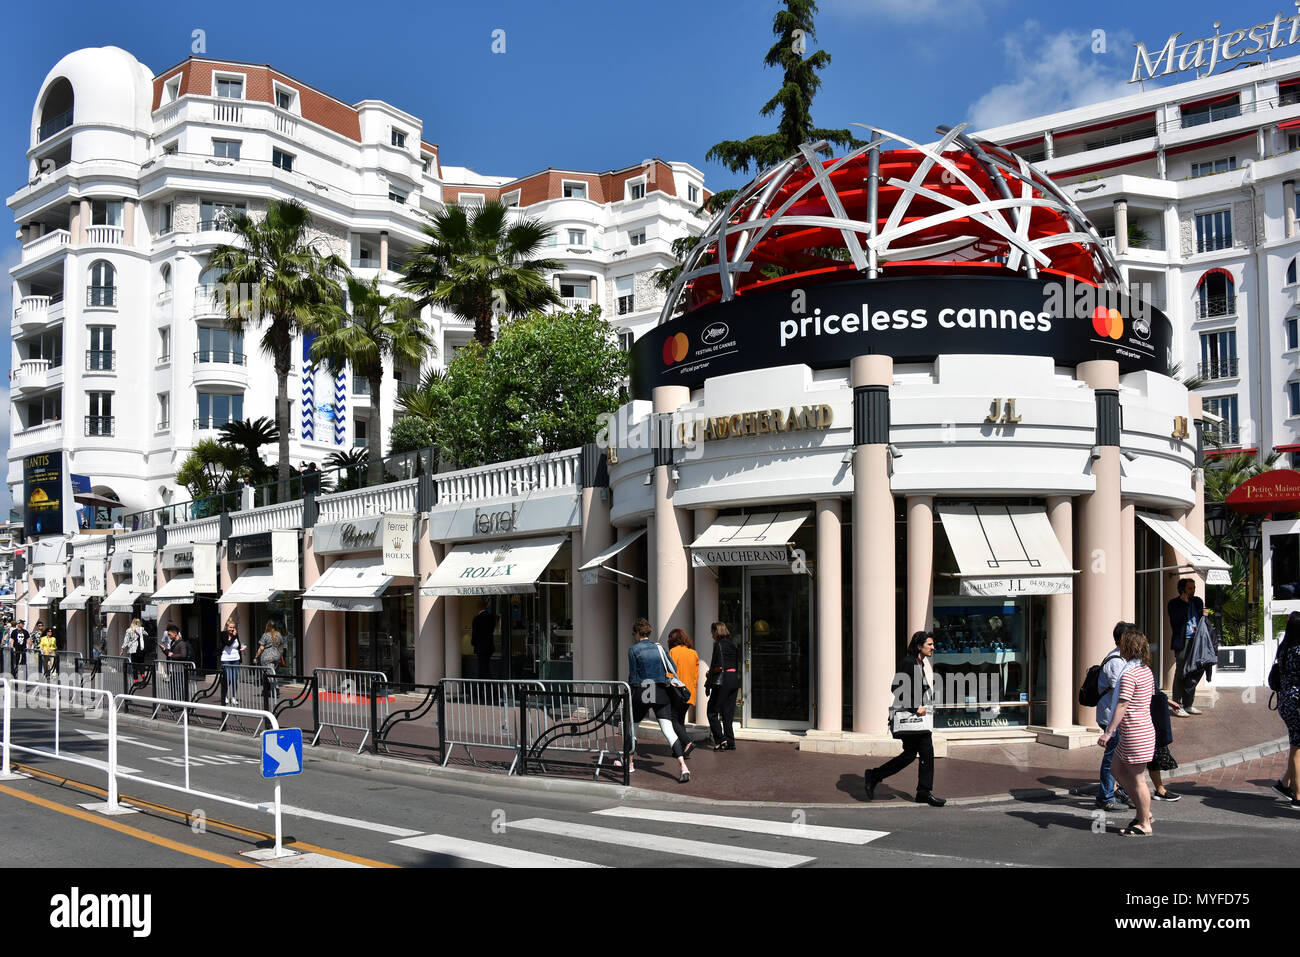 Cannes, France - May 11, 2018: Boulevard de la Croisette which contains high-end shops such as Rolex, C Gaucherand and an ad for the Film Festival. Stock Photo